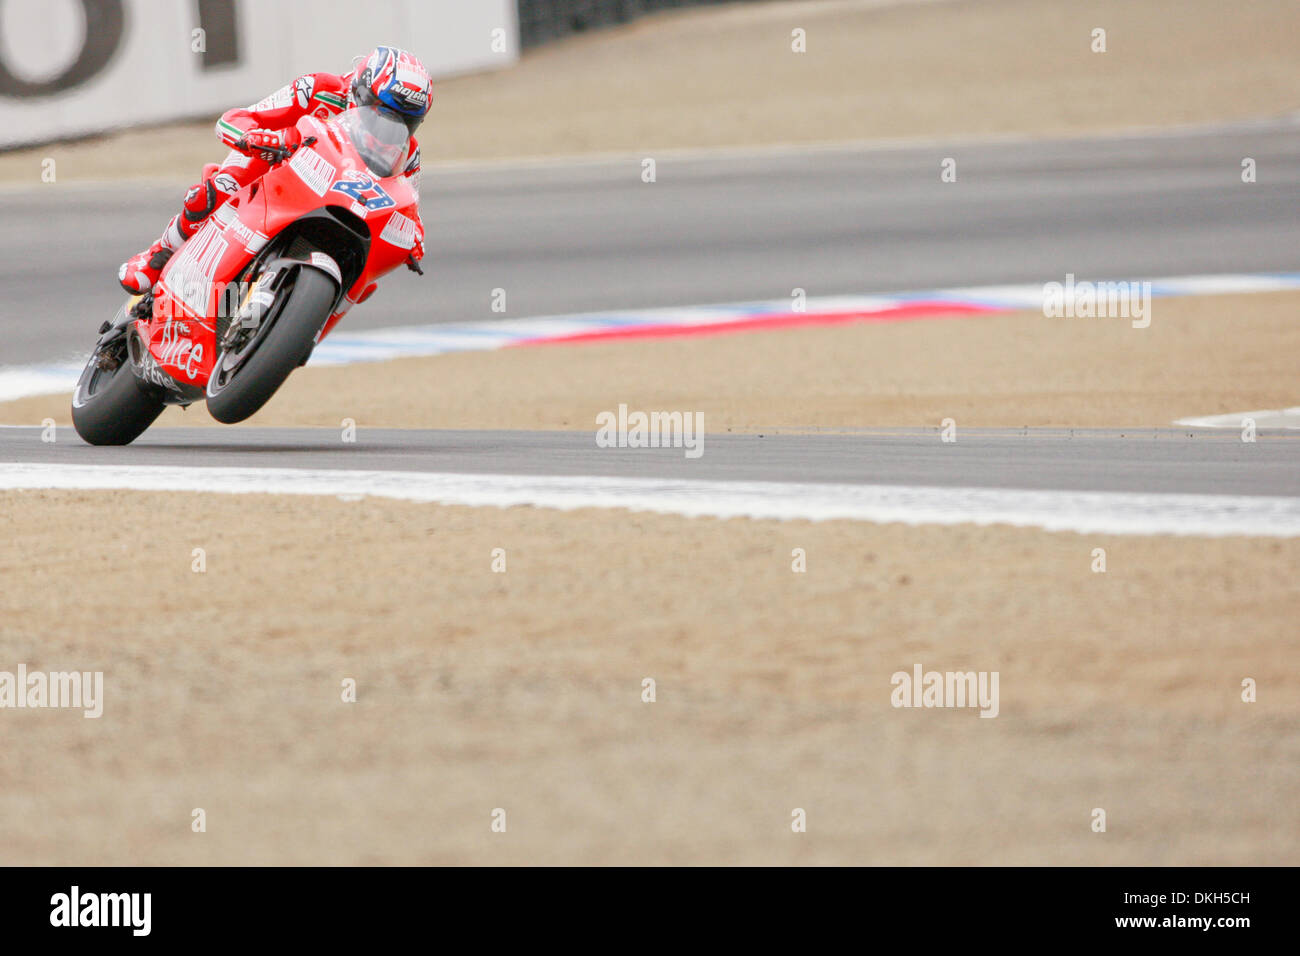 July 05, 2009 - Monterey, California, USA - 05 July 2009: Casey Stoner, of Australia, rides the #27 motorcycle for the Ducati Team during MotoGP warm-up at the  Mazda Raceway Laguna Seca, in Monterey, Calif. MotoGP's 8th race is set to take place on today, July 5, 2009 at 14:00 PST prior to making its next stop  in Germany. (Credit Image: © Konsta Goumenidis/Southcreek Global/ZUMAp Stock Photo